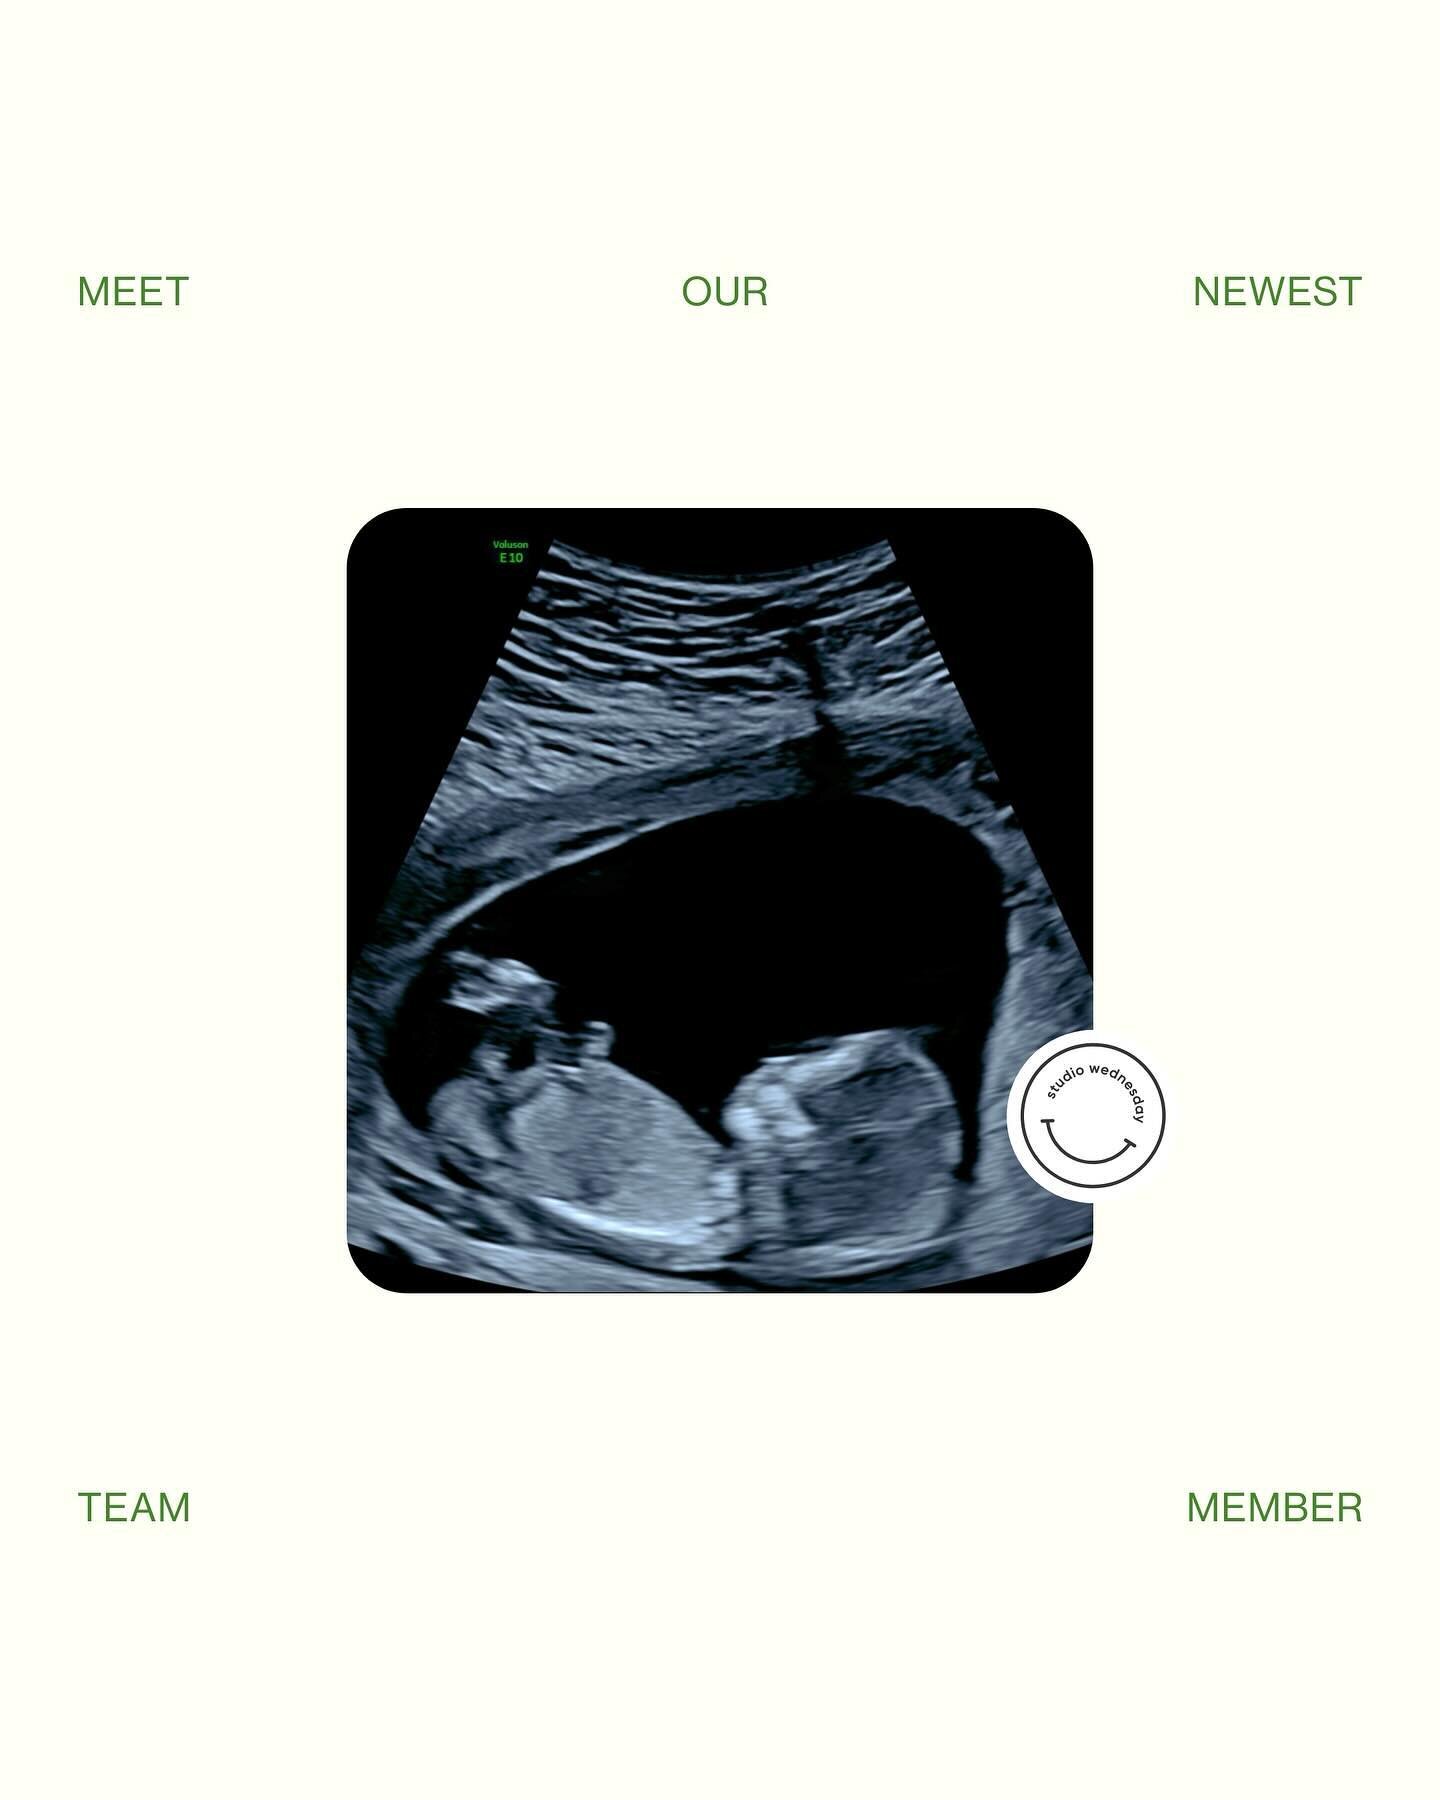 Our biggest project yet. Baby Wednesday joining the team this September 🤰🏽🥰

PS: For all our clients and future clients, yes we are still knee deep in work and taking bookings until August! If you&rsquo;ve wanted to work with SW, now is your last 